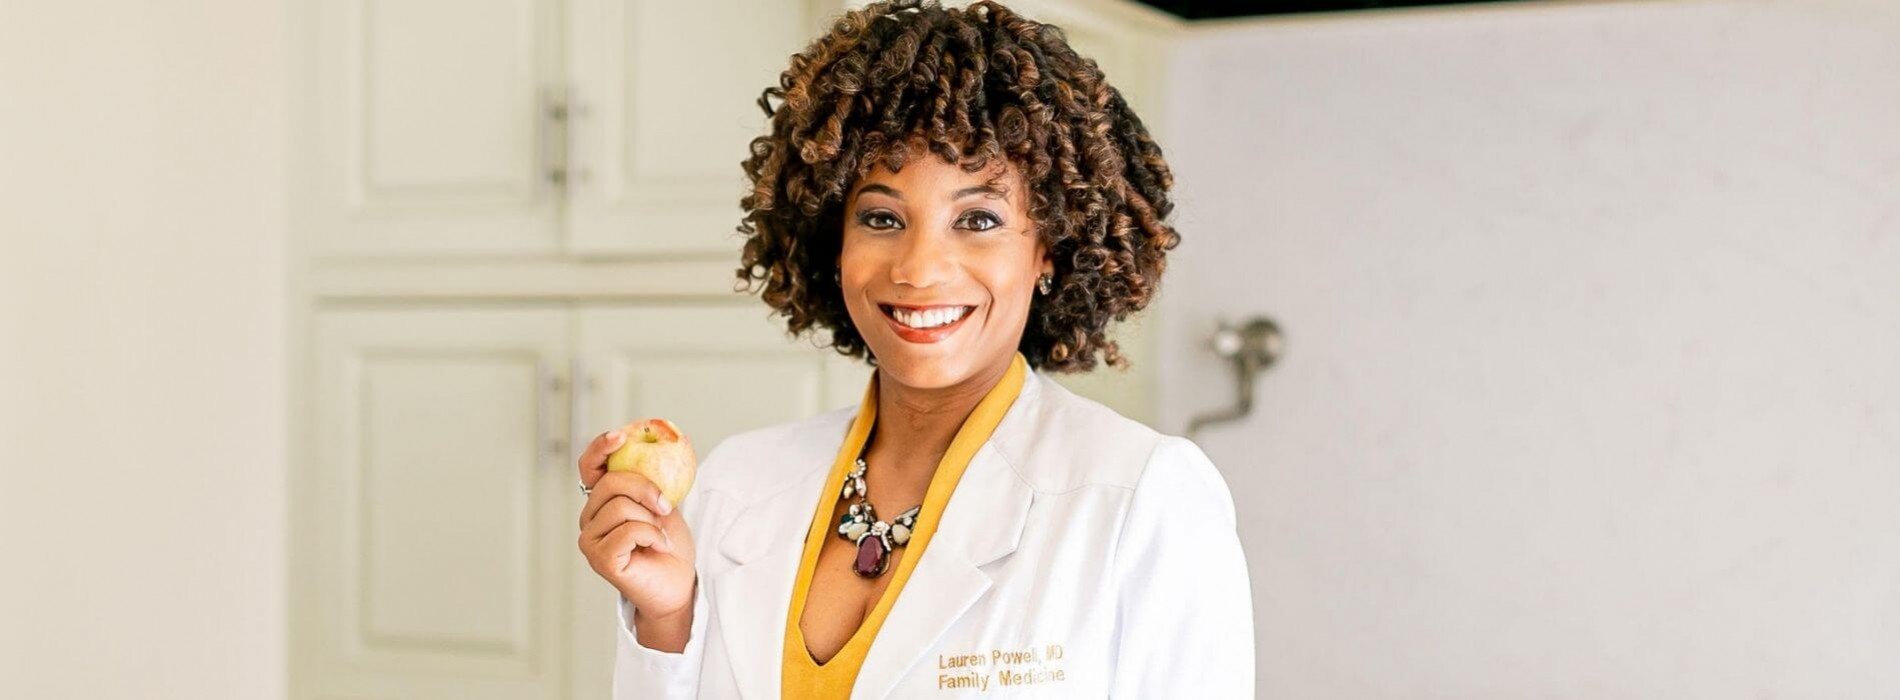 Food as Medicine: An IG Chat with Dr. Lauren Powell